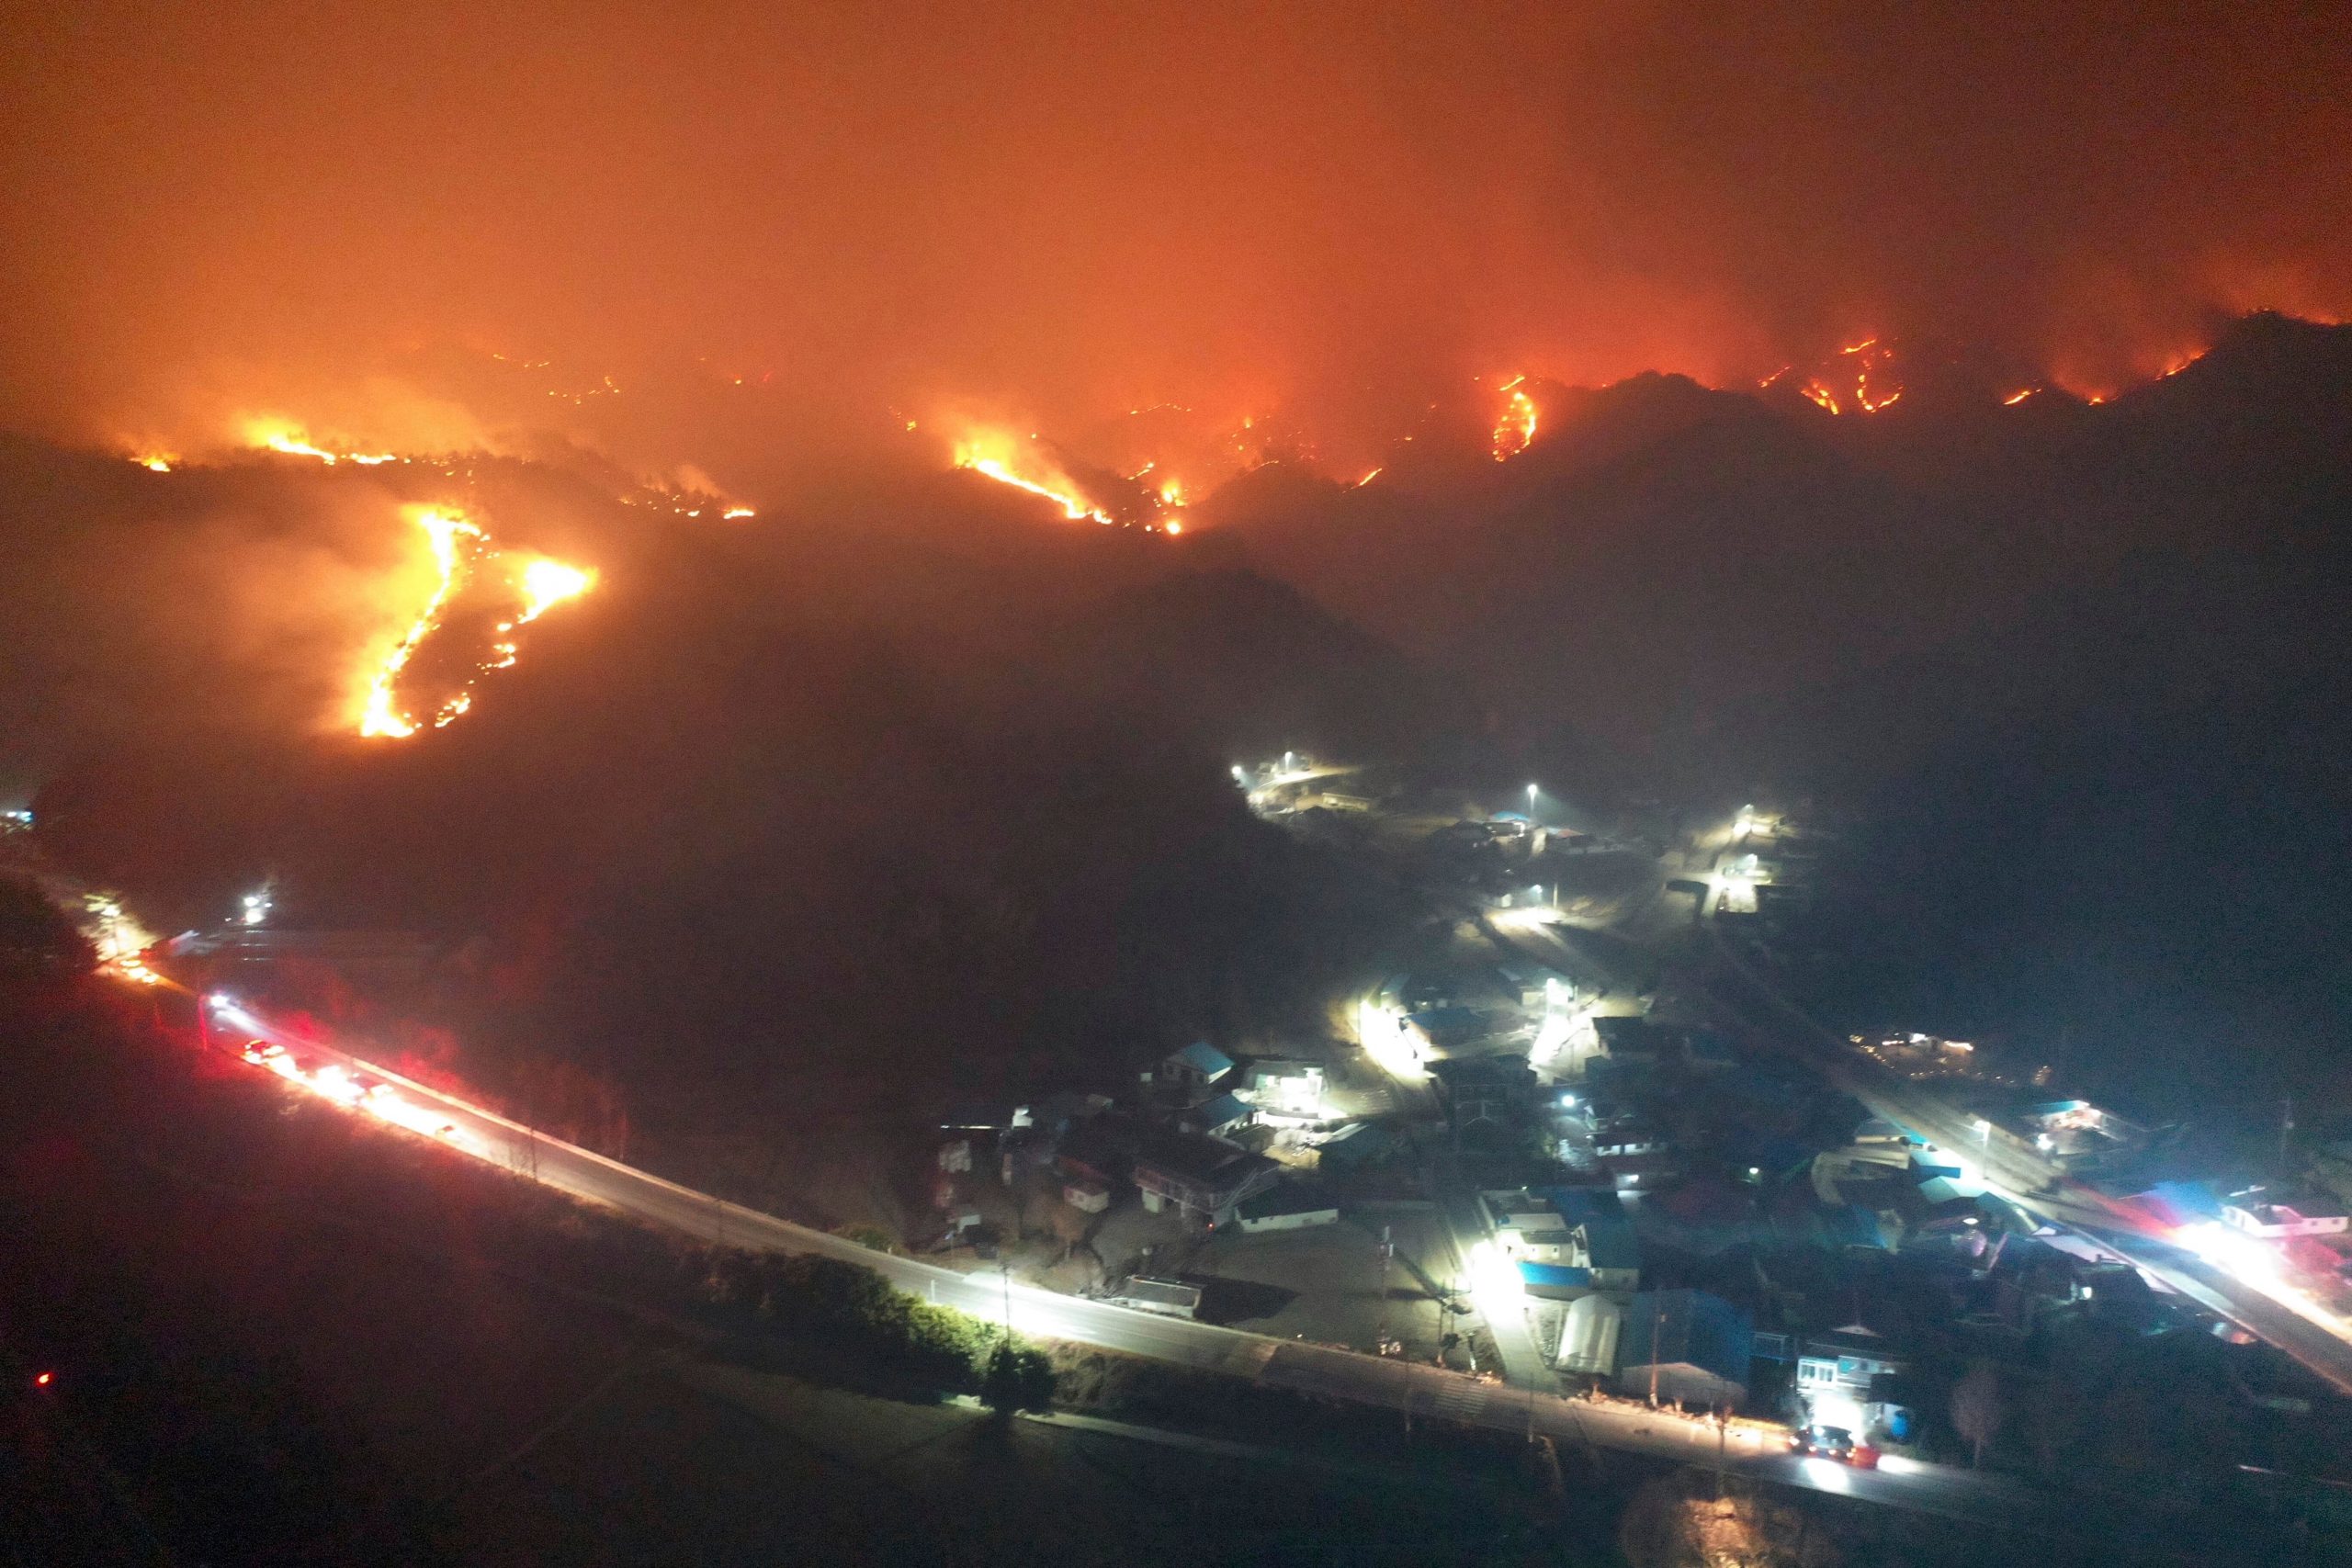 Wildfire in South Korea destroys 90 homes, forces 6,000 to flee